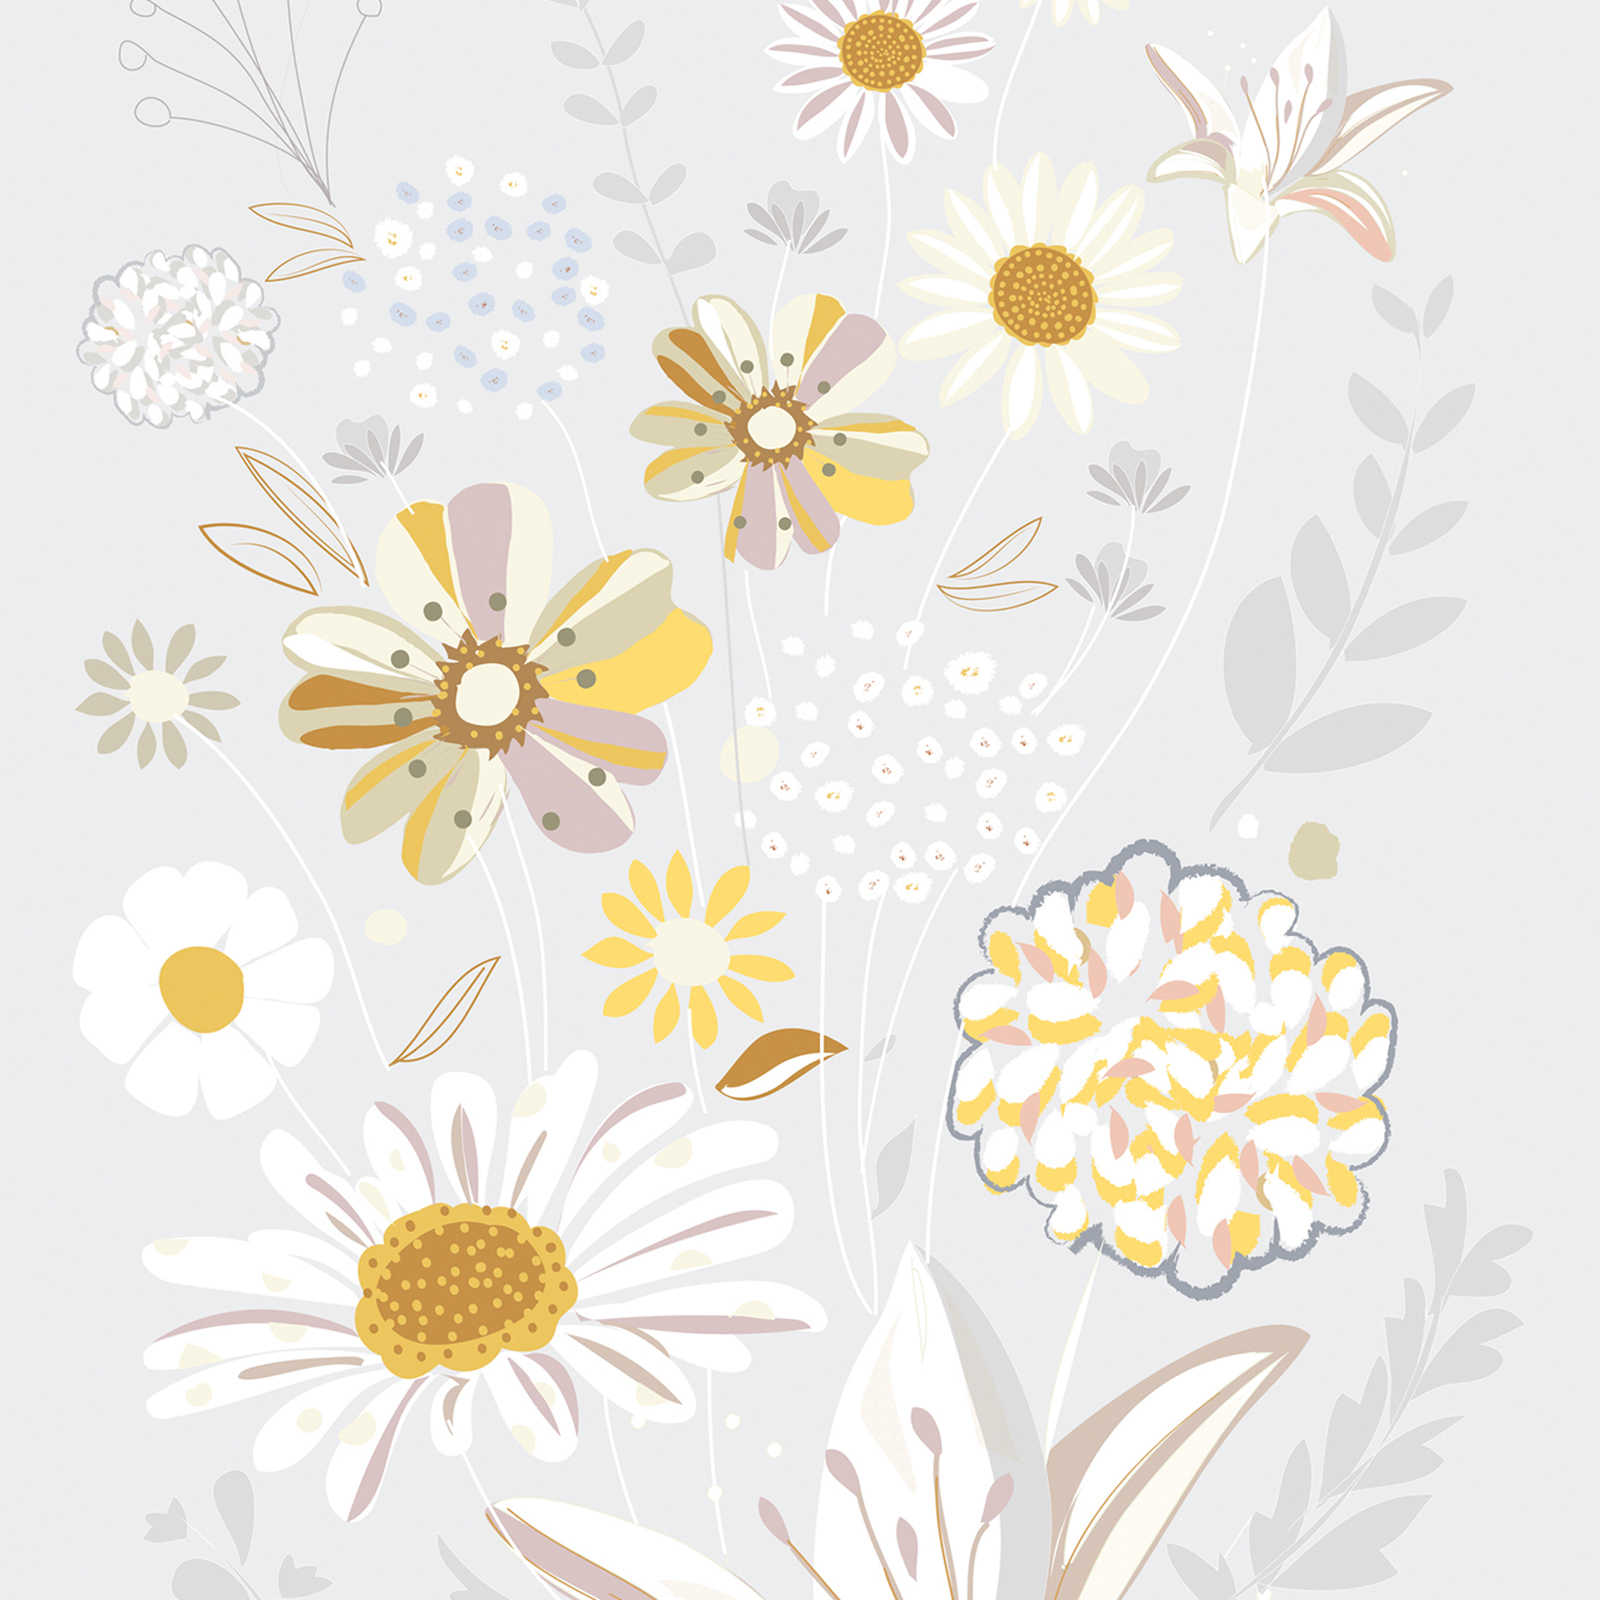 Floral pattern wallpaper with grasses in light colours - grey, yellow, beige
